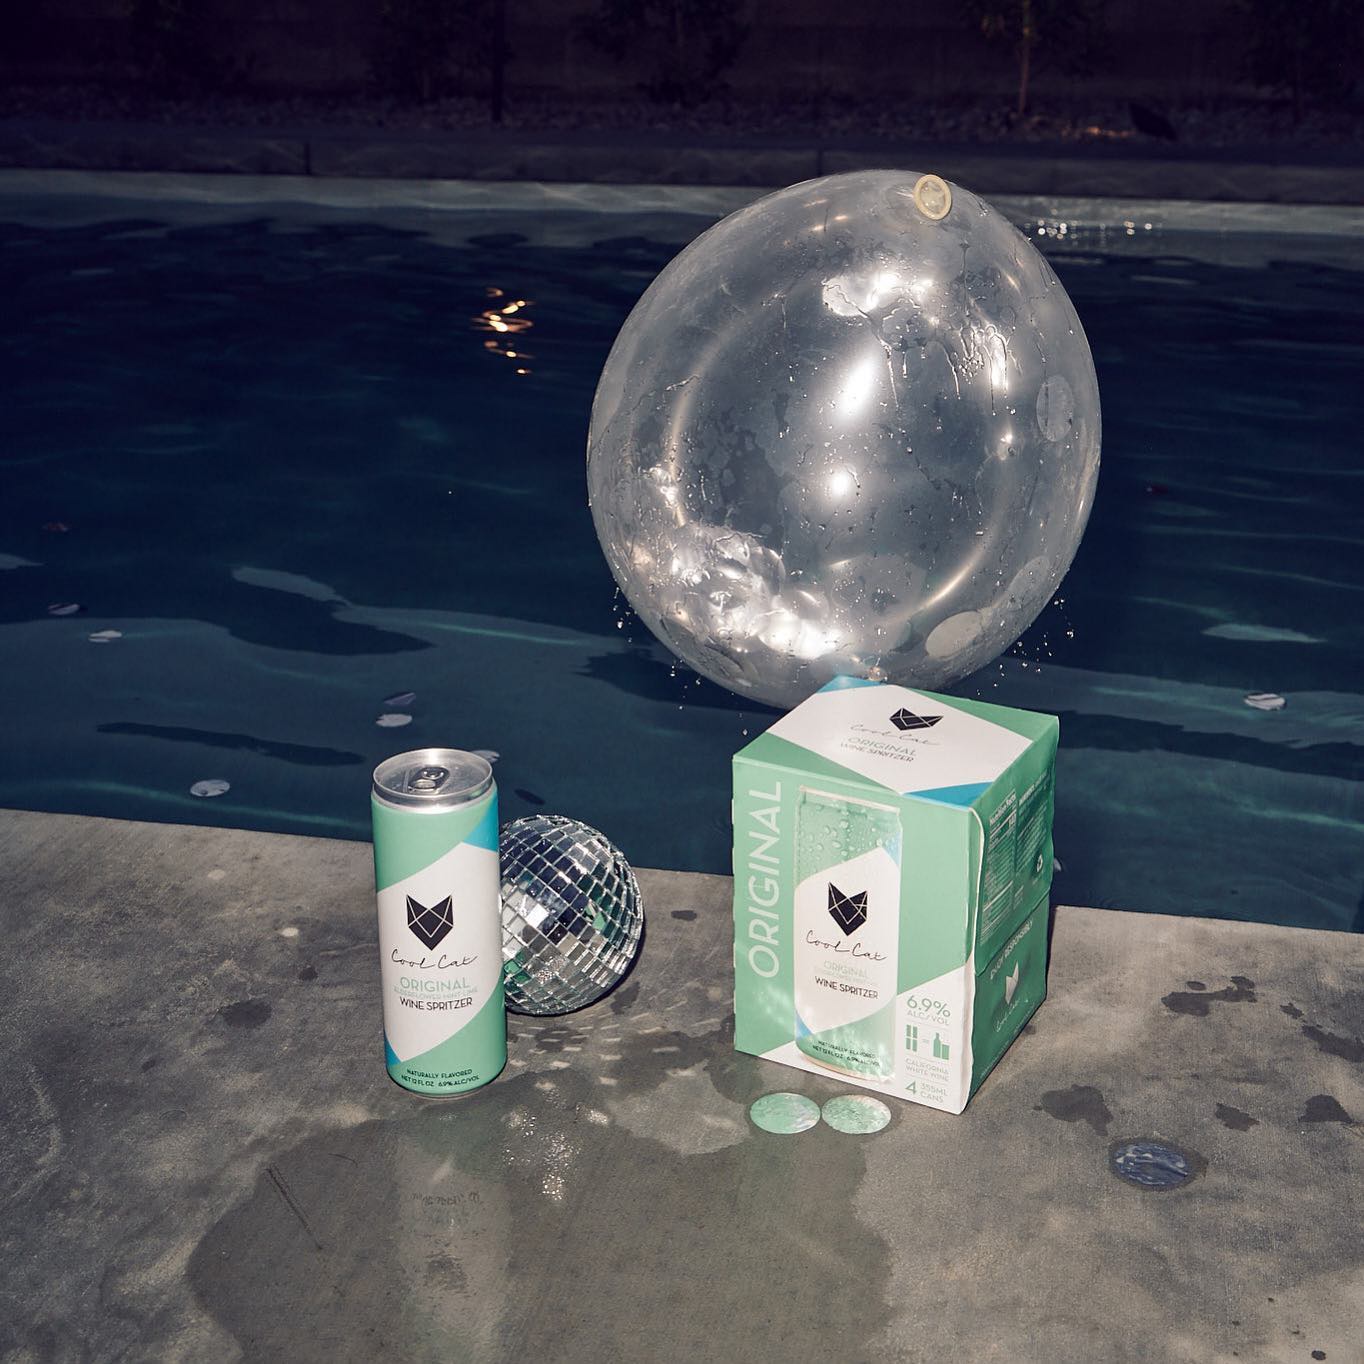 Original flavor can of Cool Cat Wine Spritzer next to a 4-pack at a disco pool party.